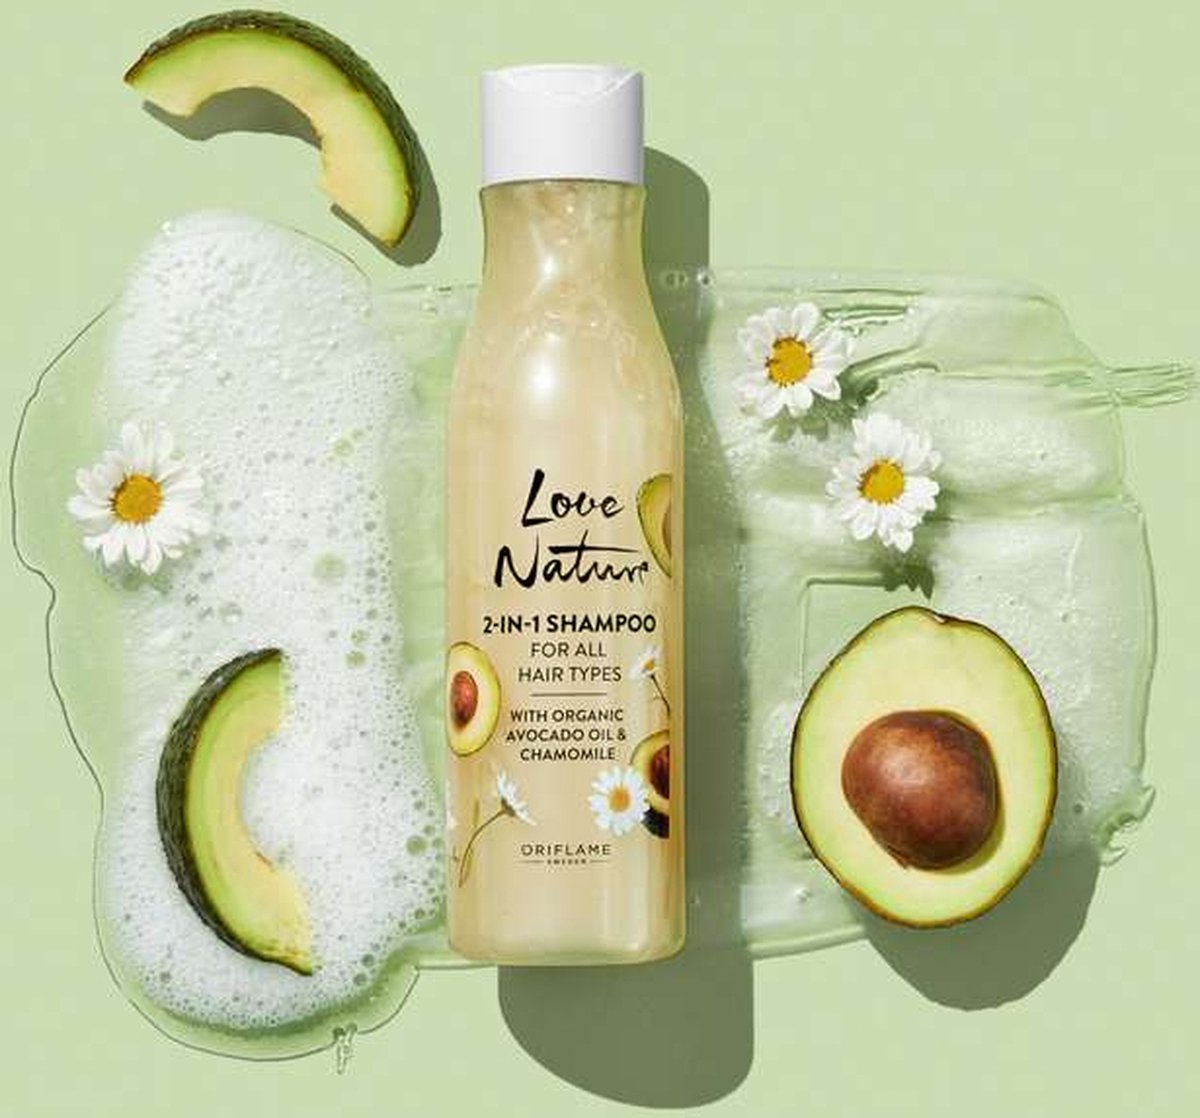 LOVE NATURE - 2-in-1 Shampoo For All Hair Types with Organic Avocado Oil & Chamomile